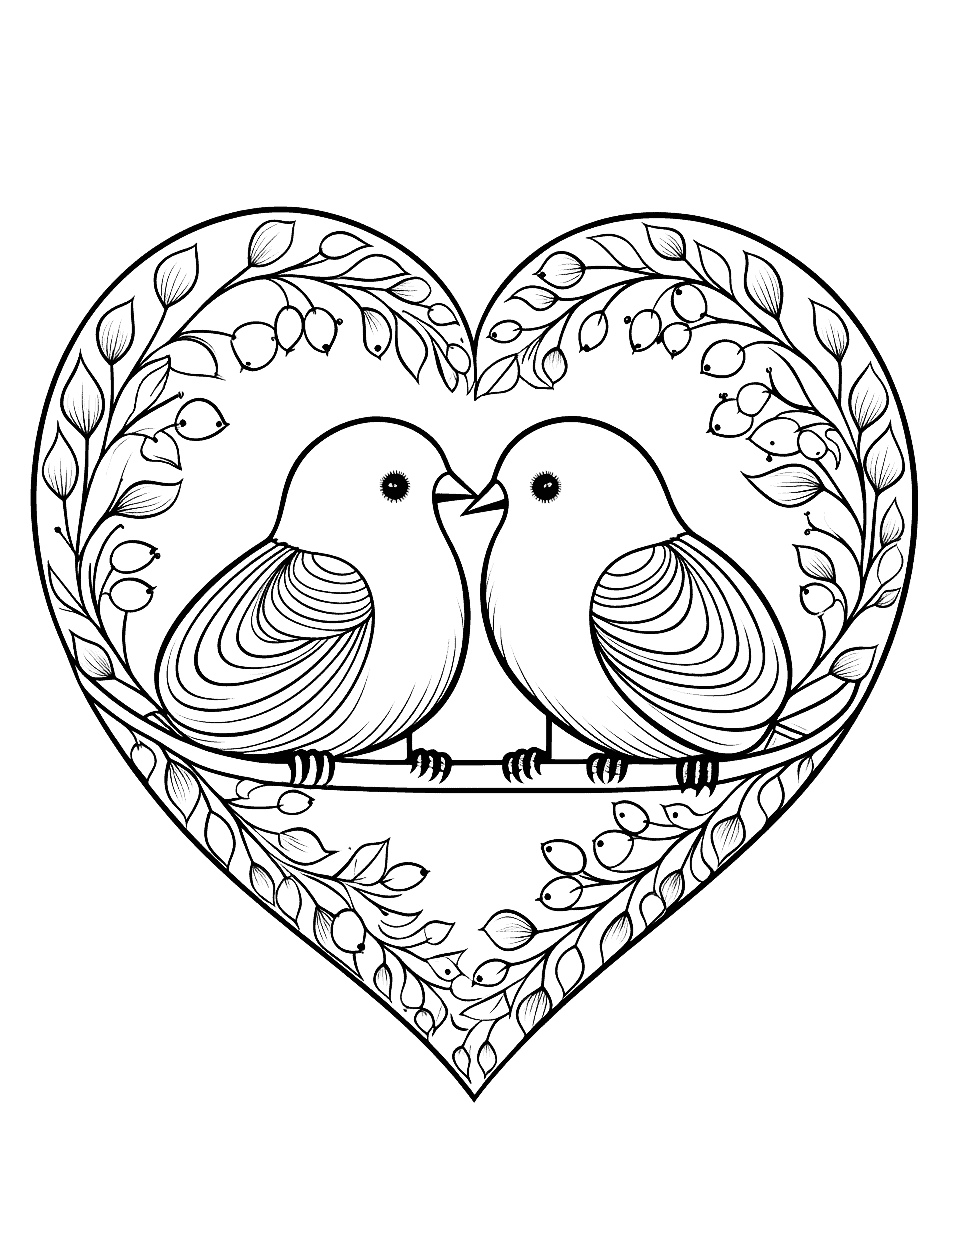 Love Birds Heart Coloring Page - Two birds forming a heart shape with their beaks.